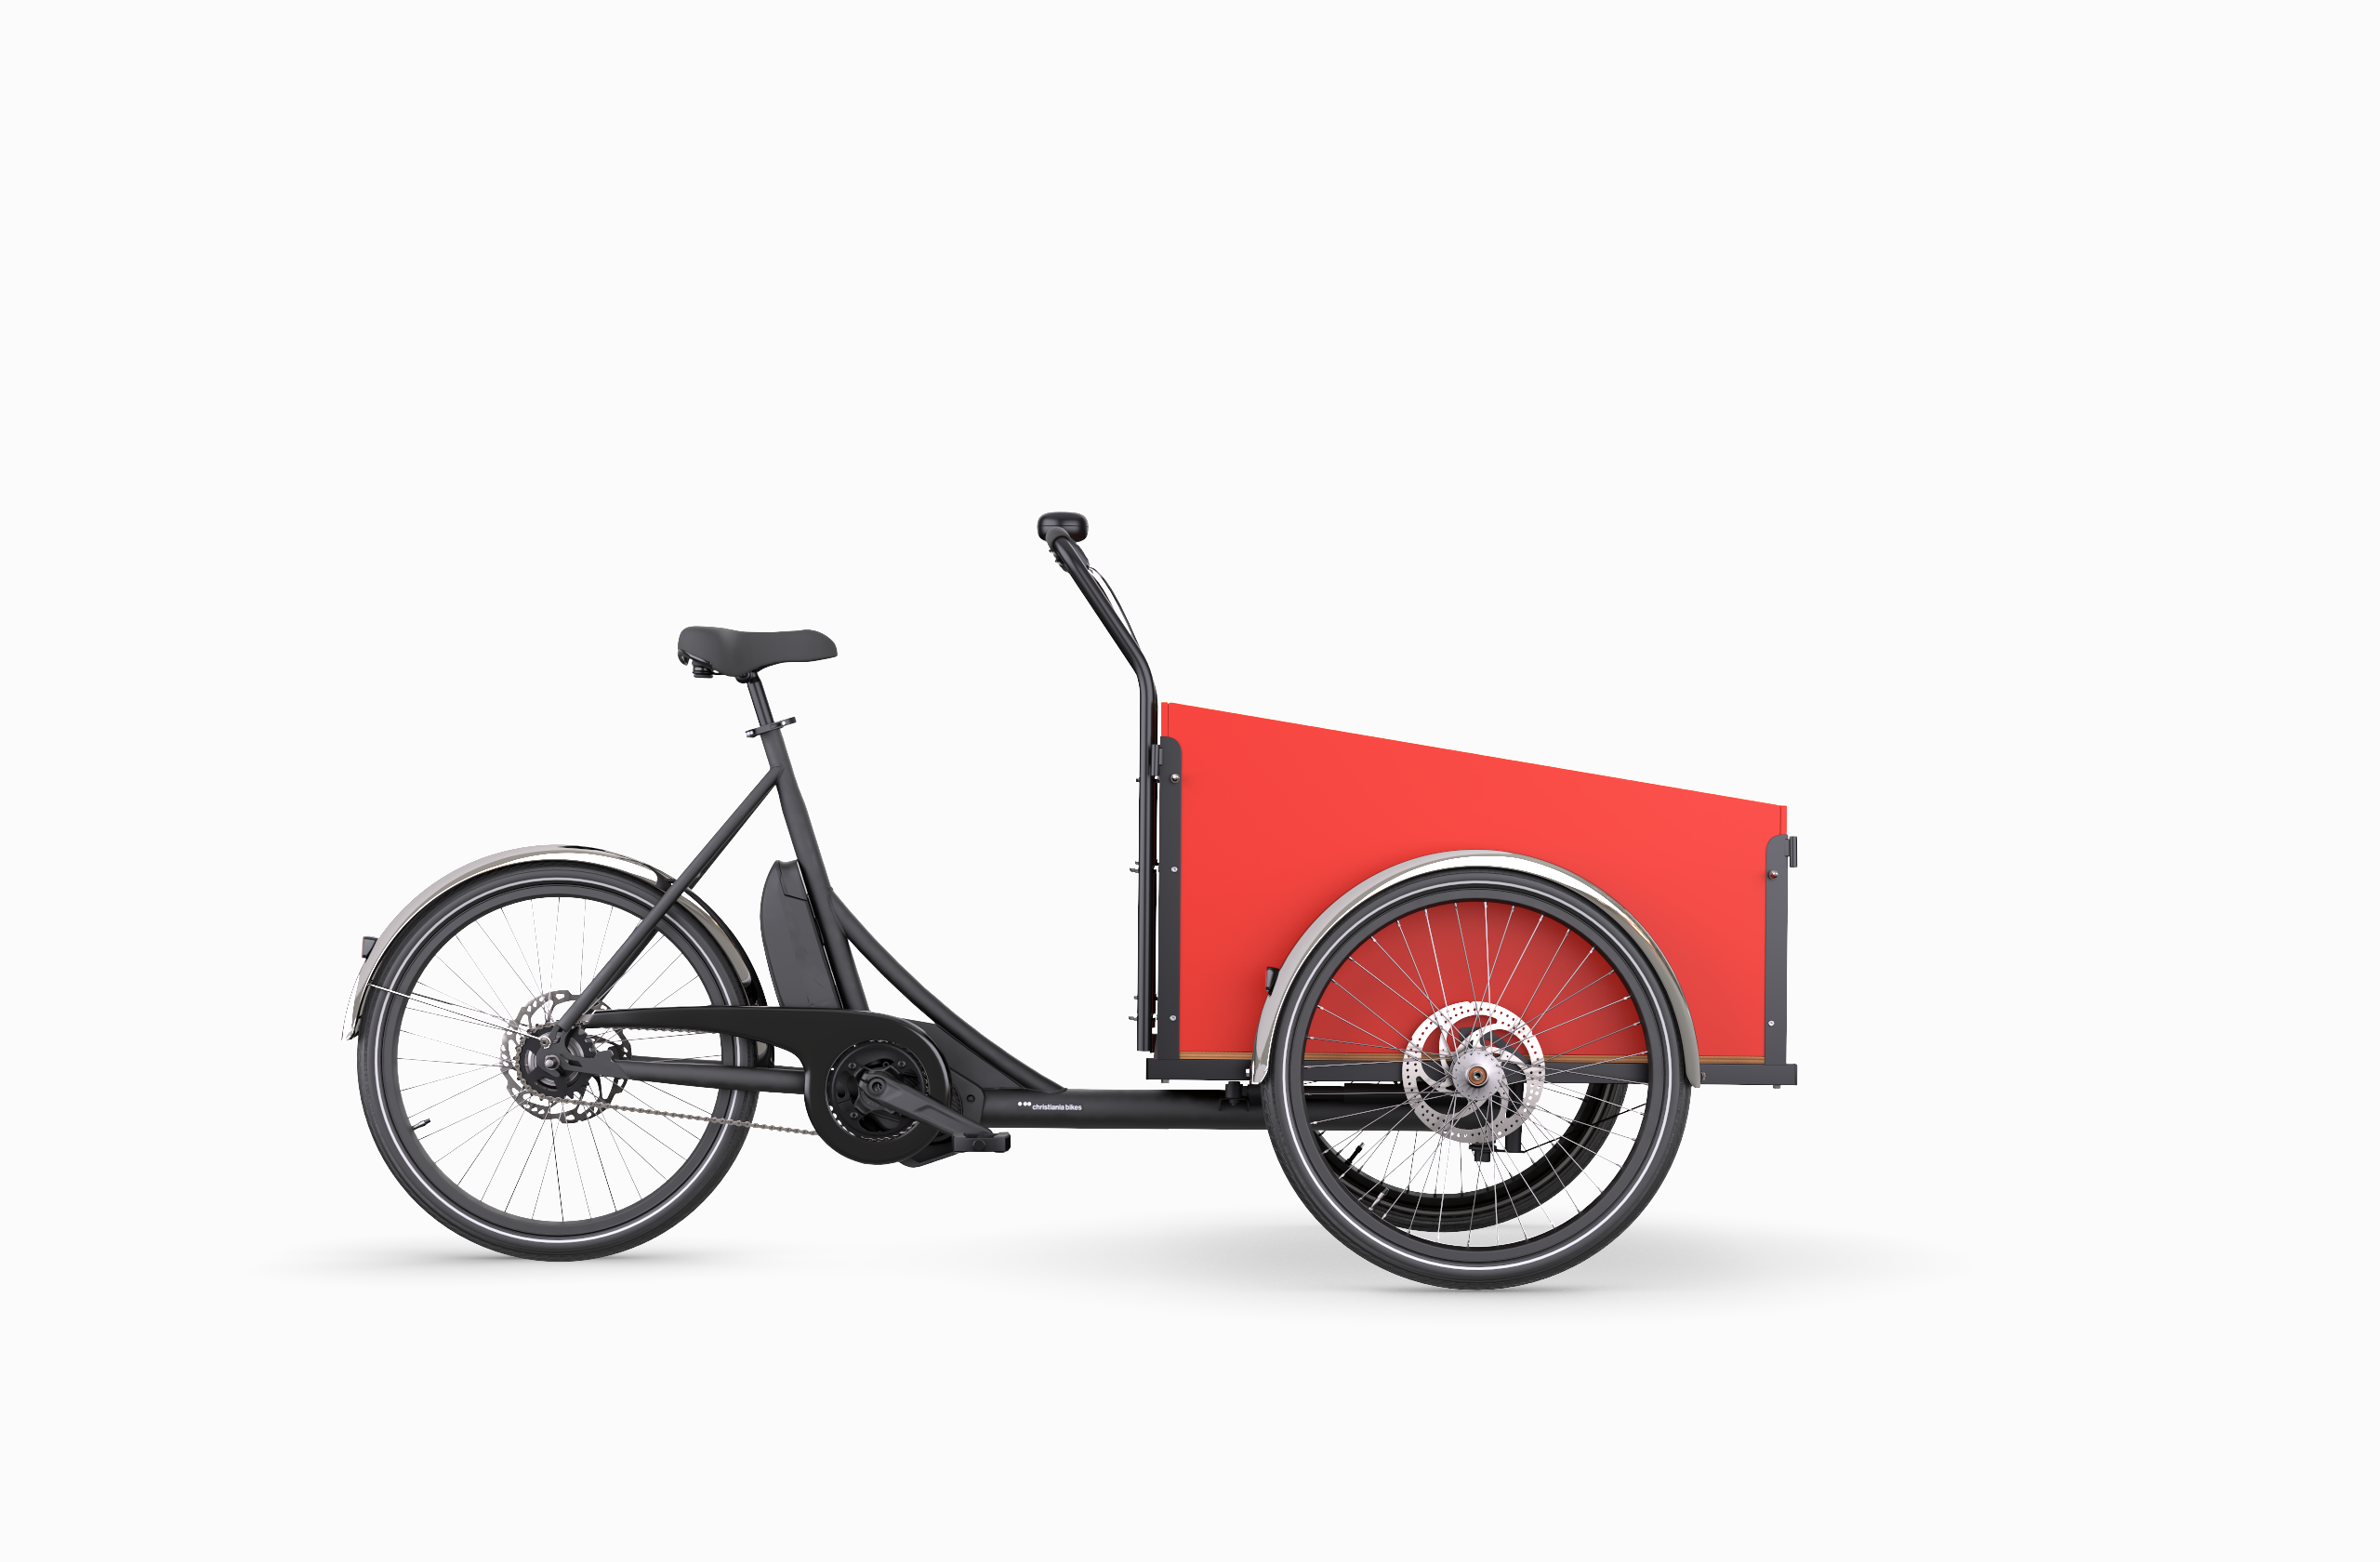 MidDrive bike with Red Cargo Box